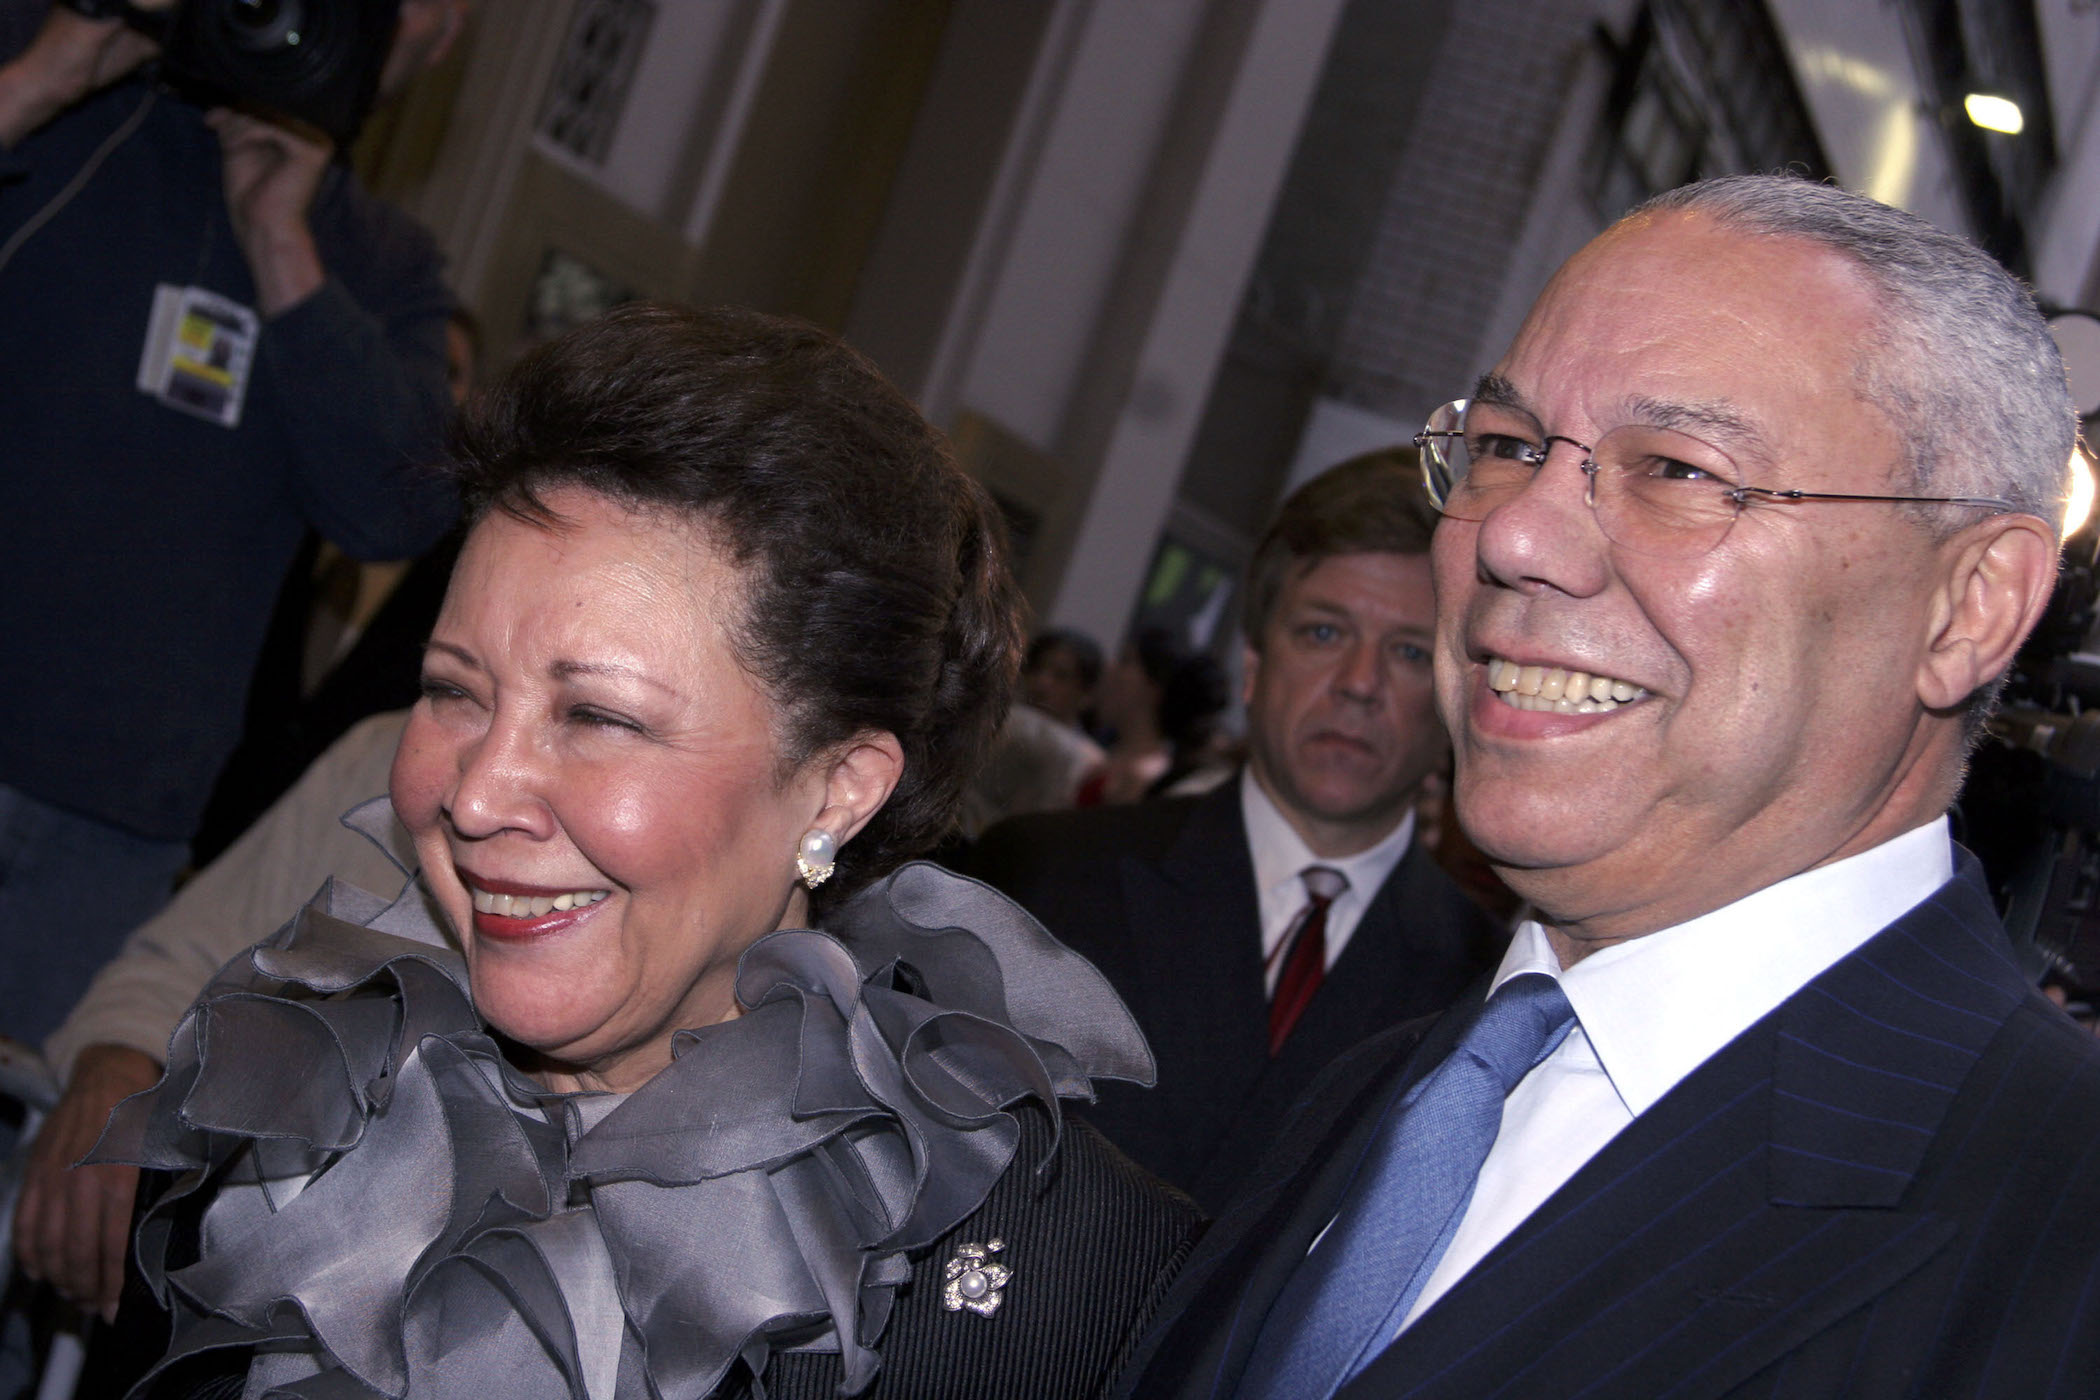 Colin Powell and Colin Powell's wife, Alma Powell, smiling together at an event